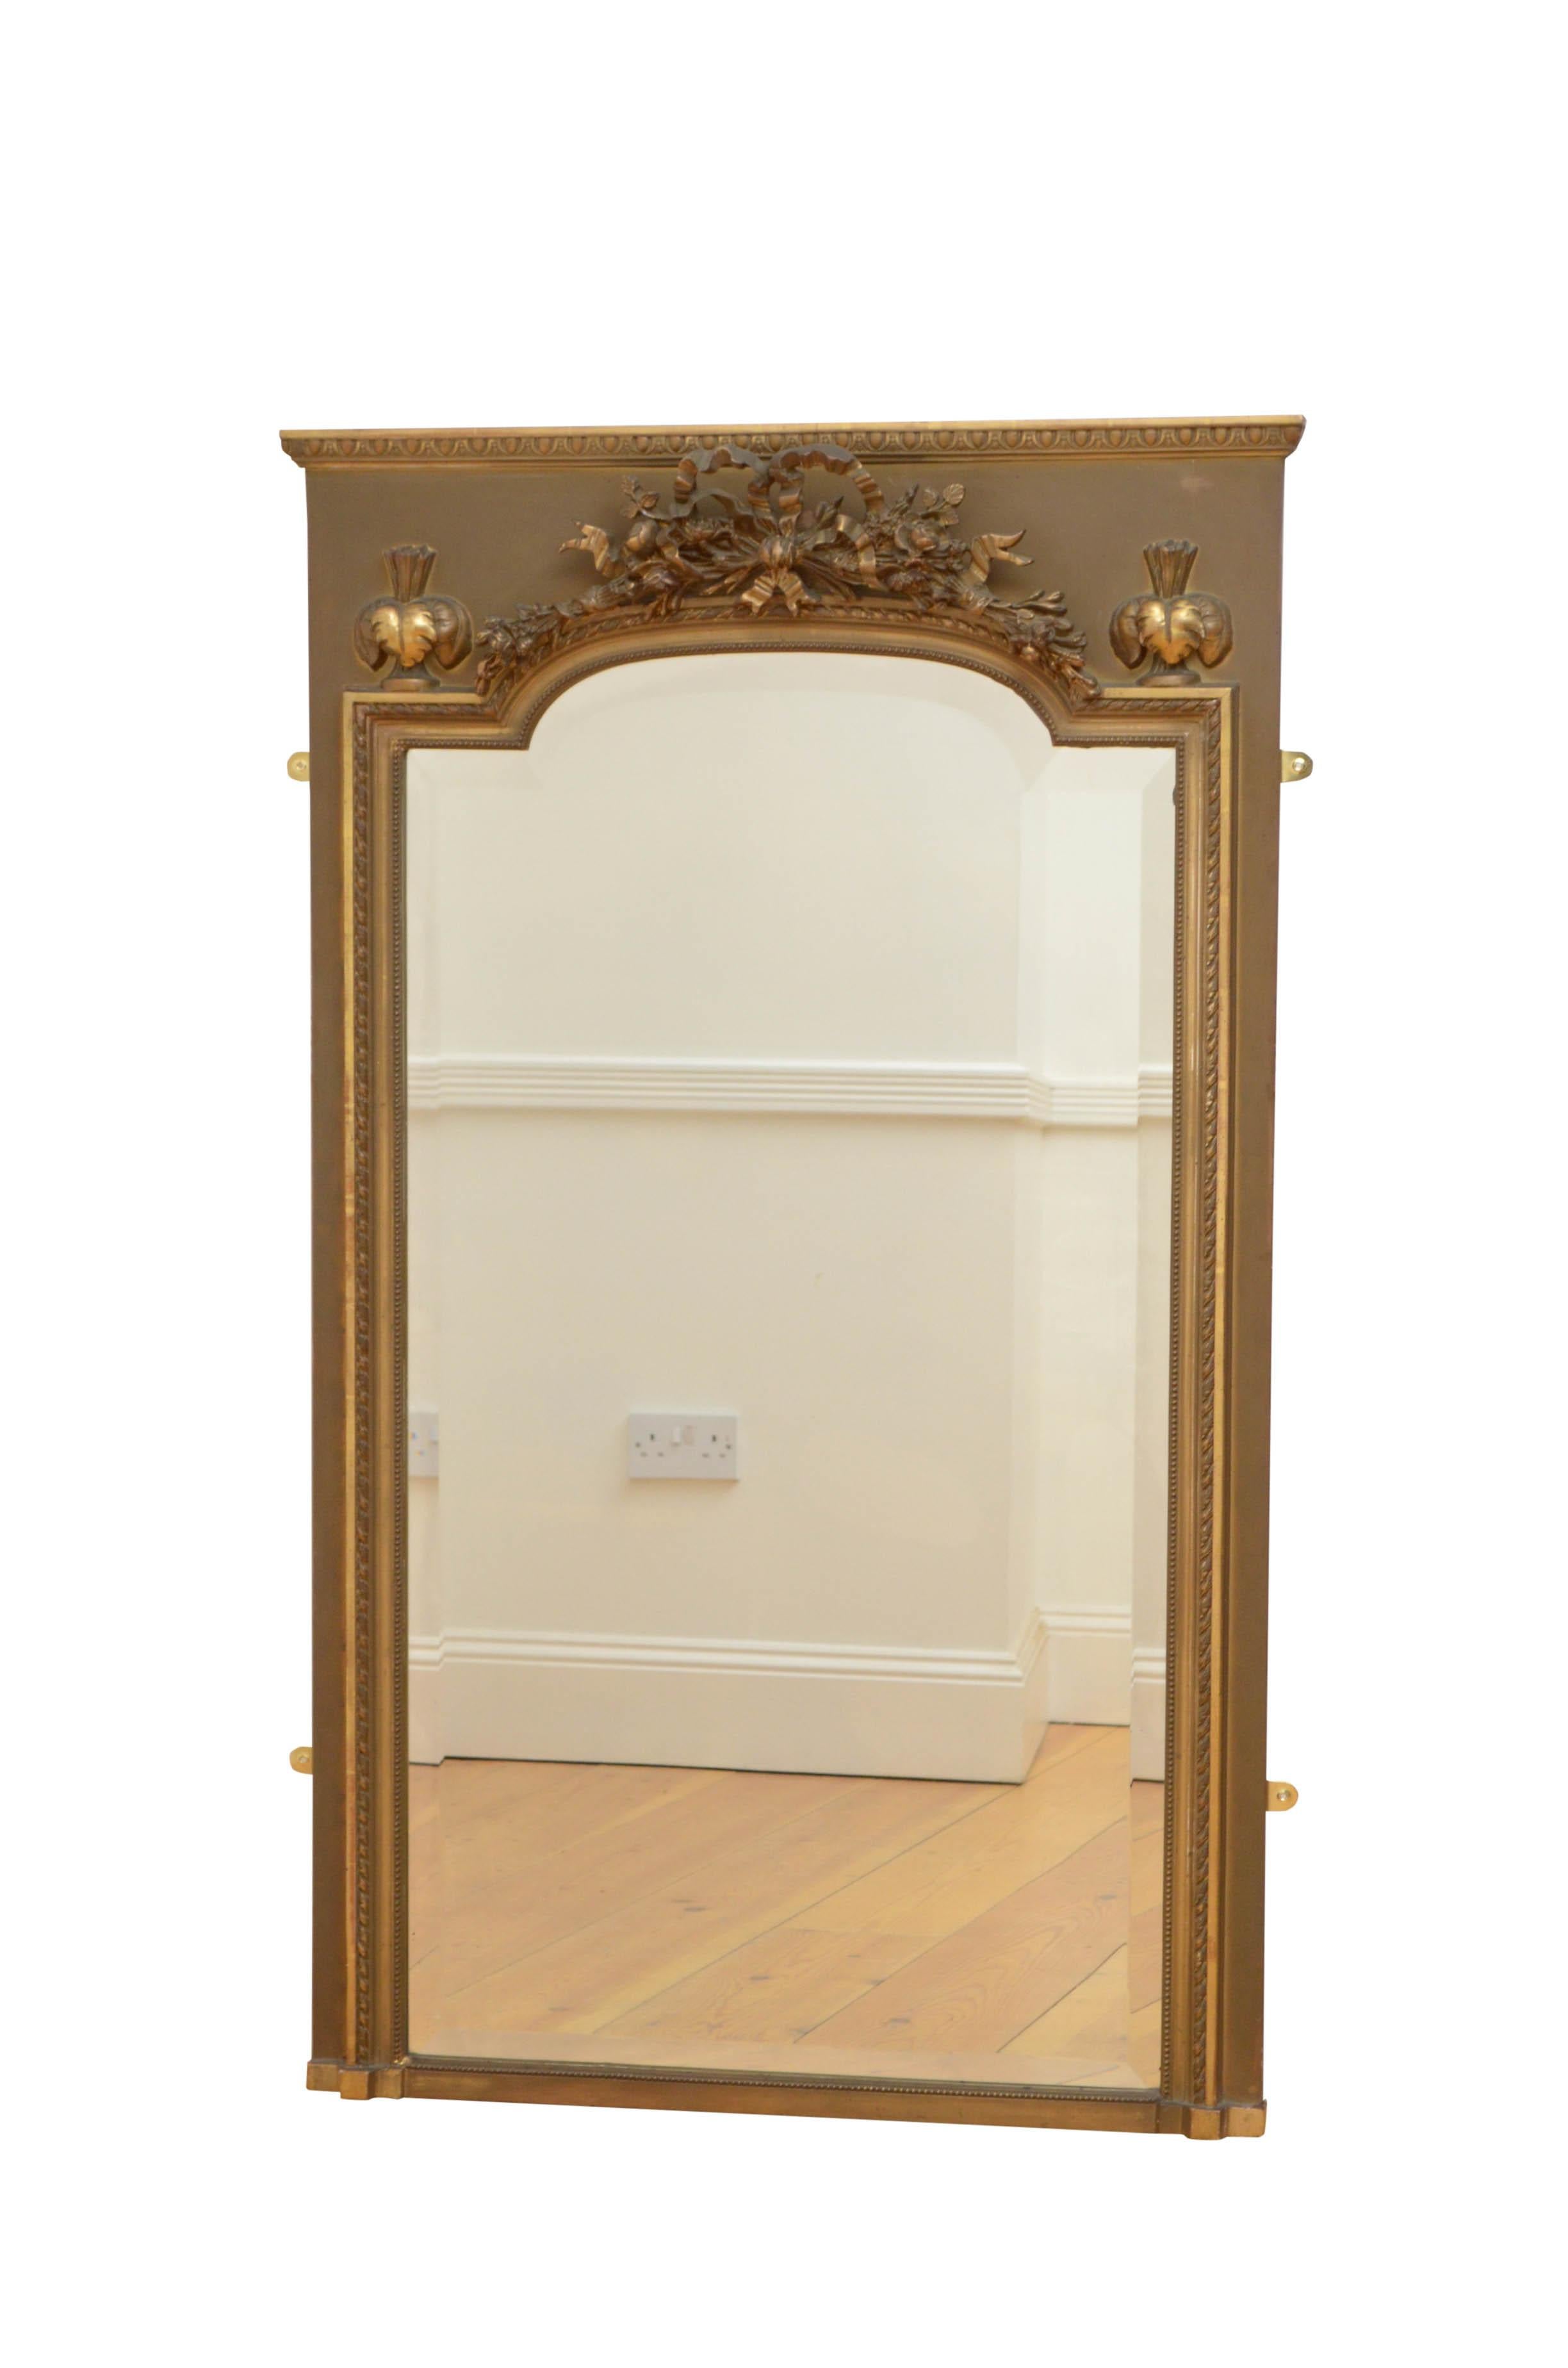 Beautiful French trumeau mirror with original beveled edge glass with some foxing in gilded, beaded and carved frame with egg and dart cornice and foliage centre crest with a bow flanked by leafy finials, all on dark green frame. This antique mirror